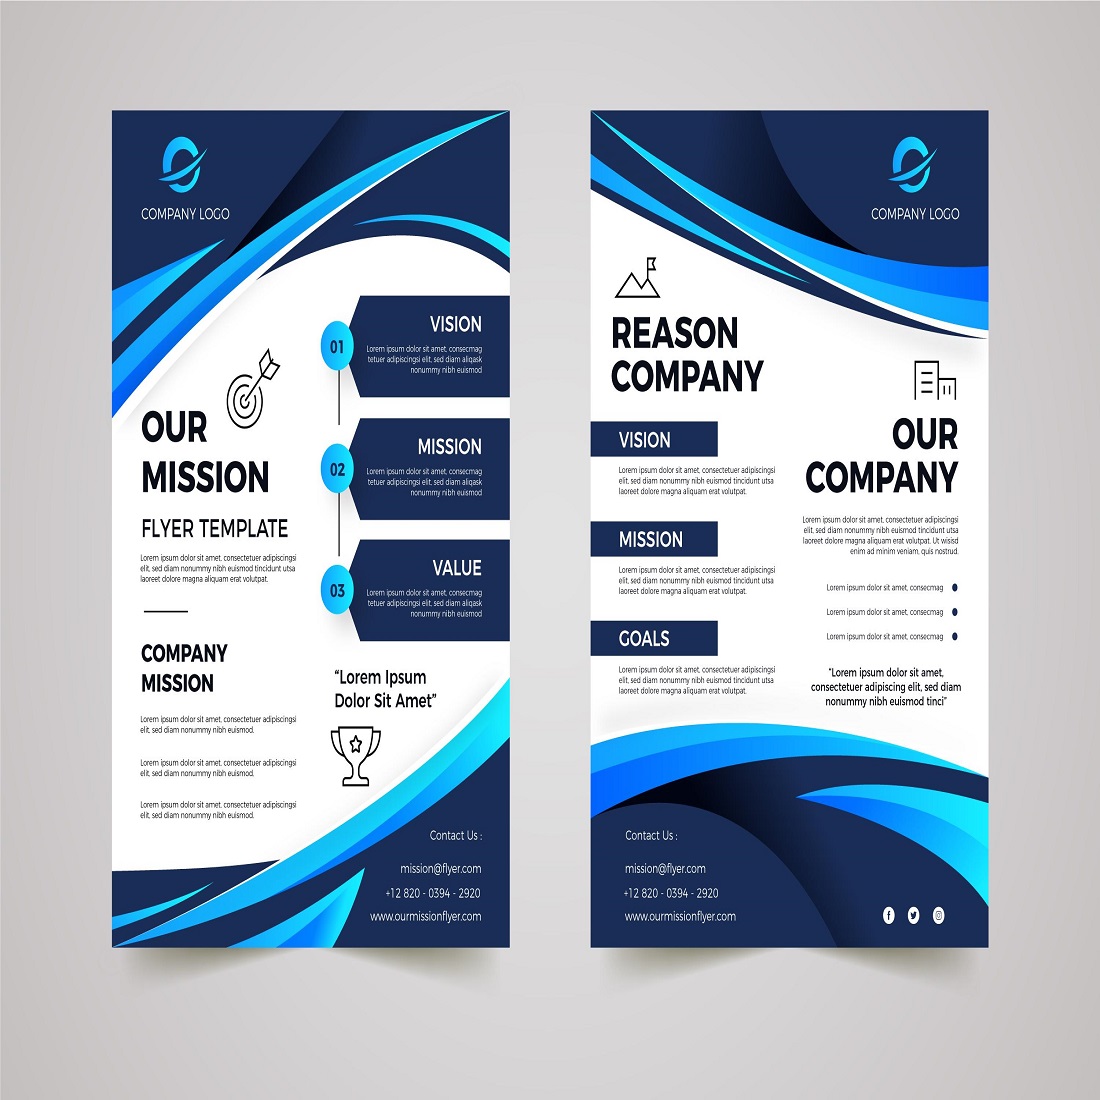 gradient our mission flyers template.jpg 839